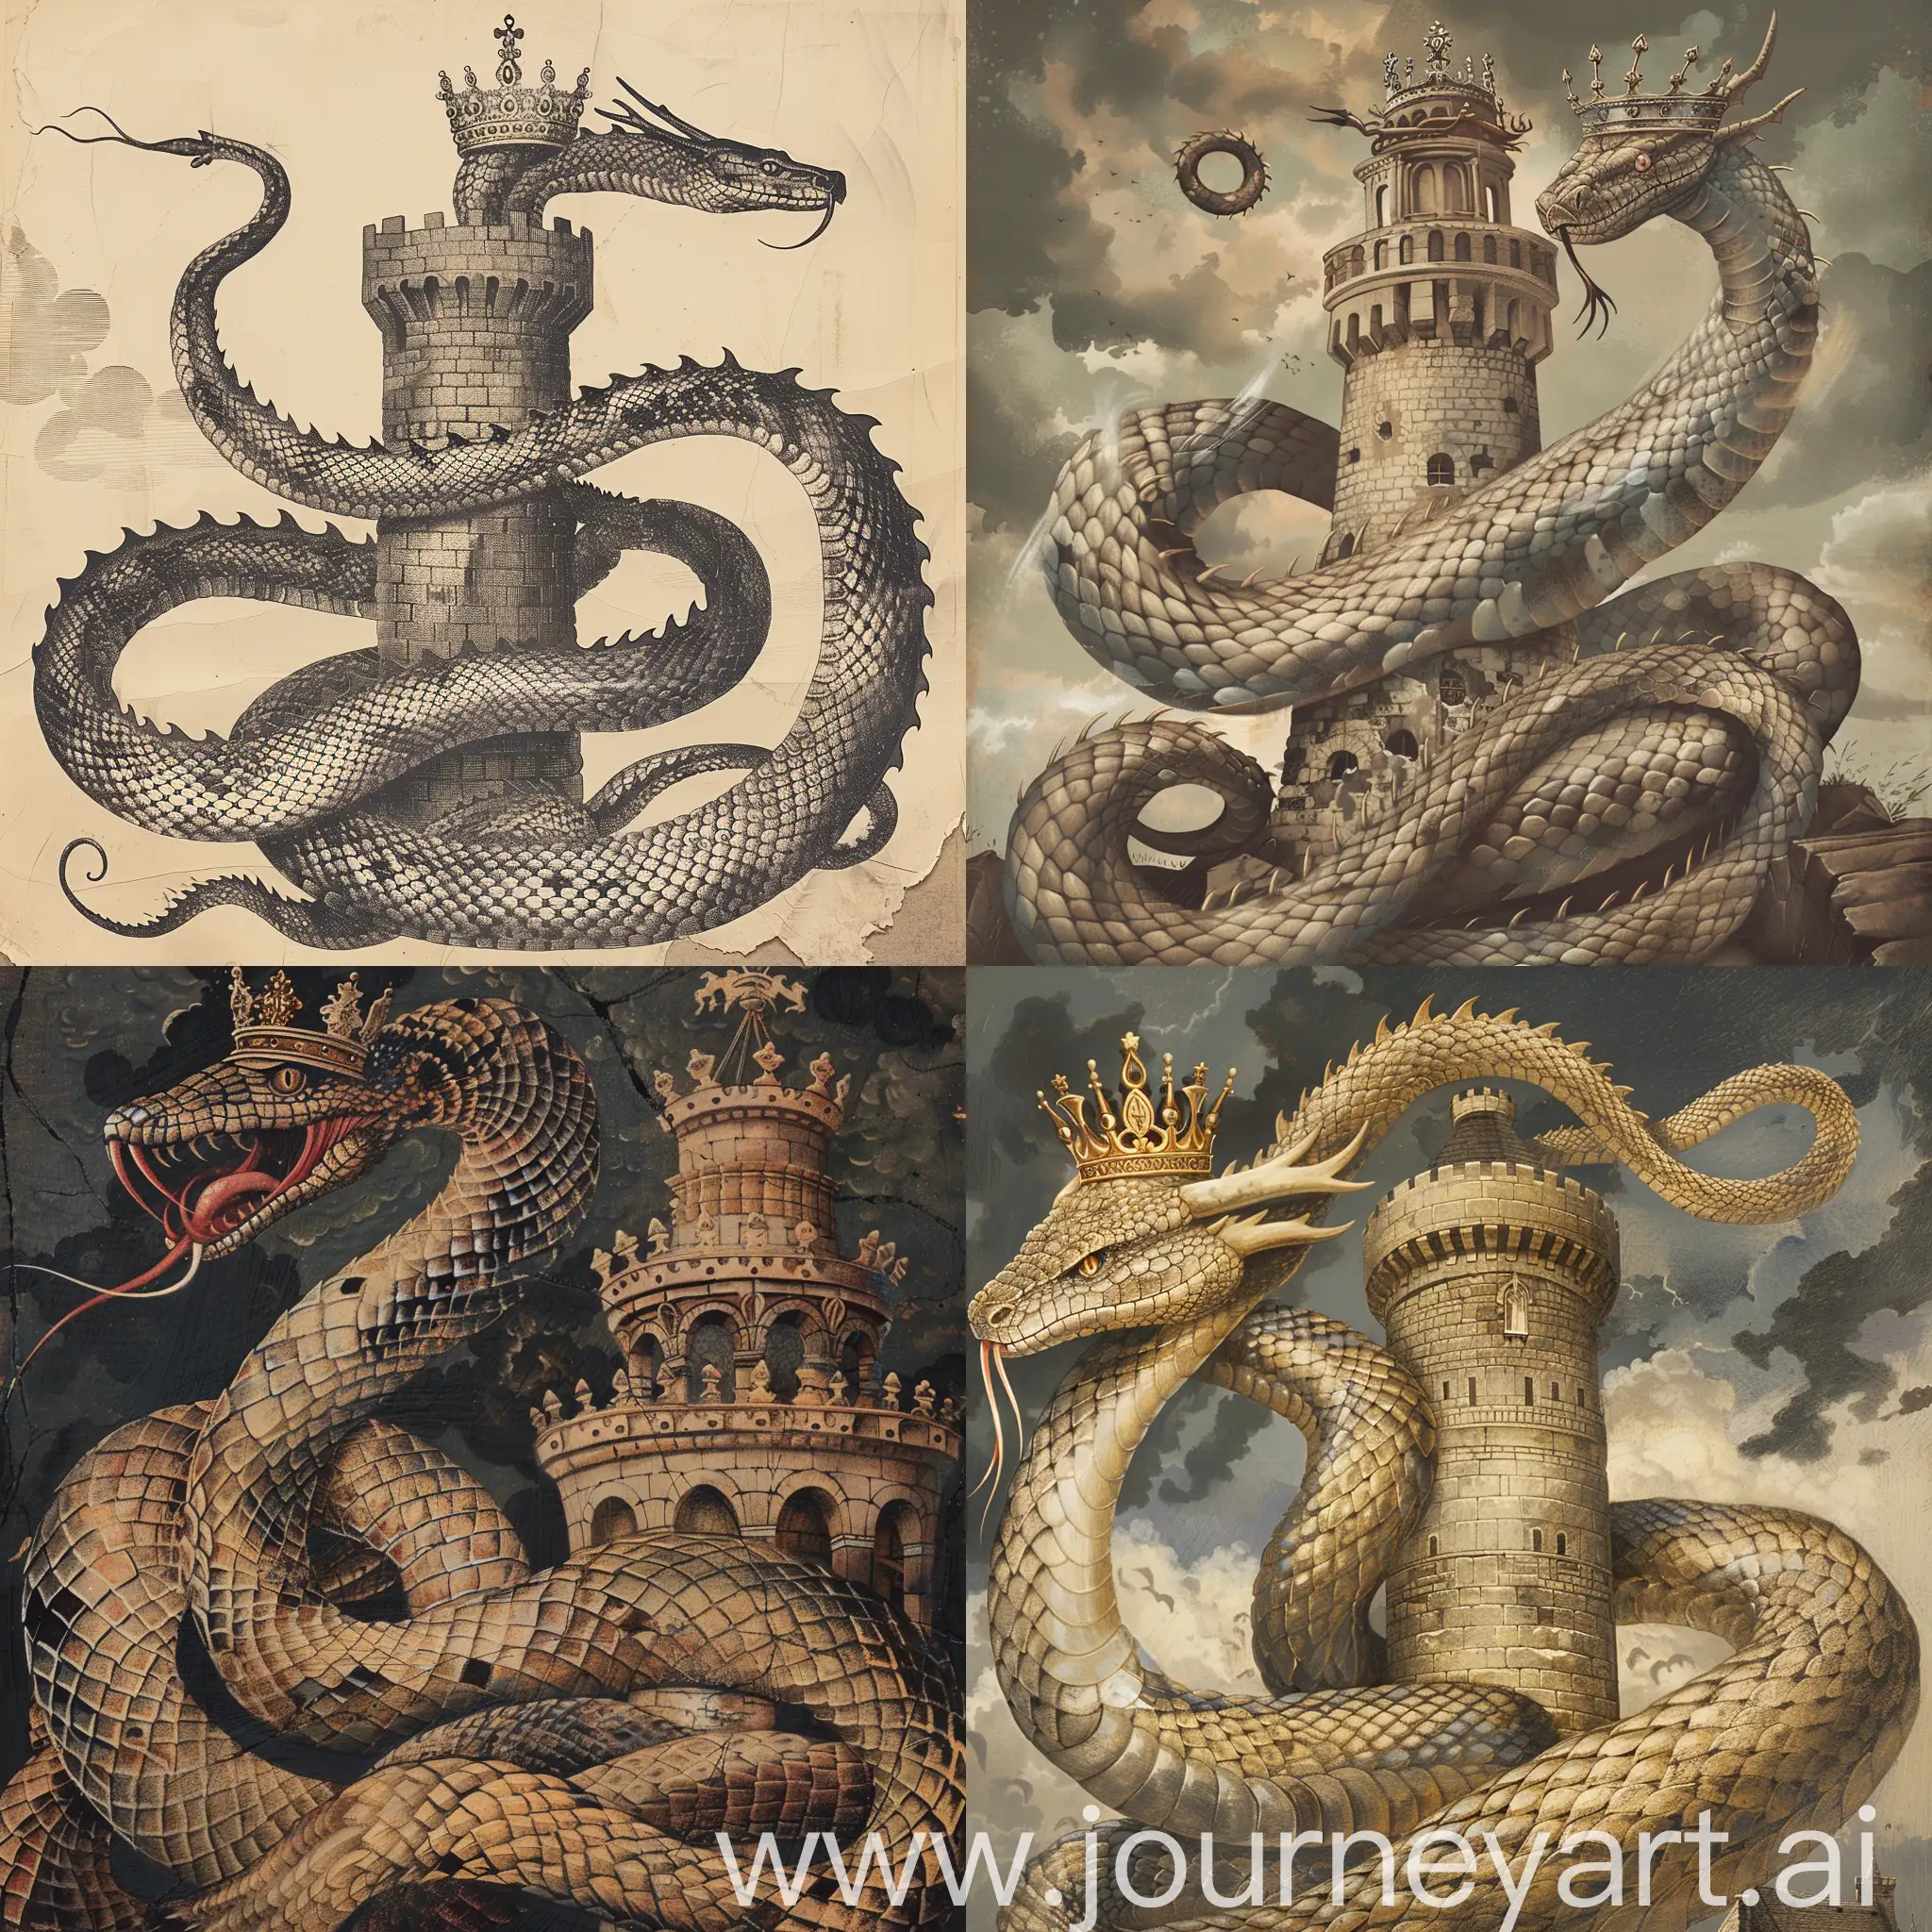 Majestic-DragonSnake-with-Crown-Coiling-Around-Tower